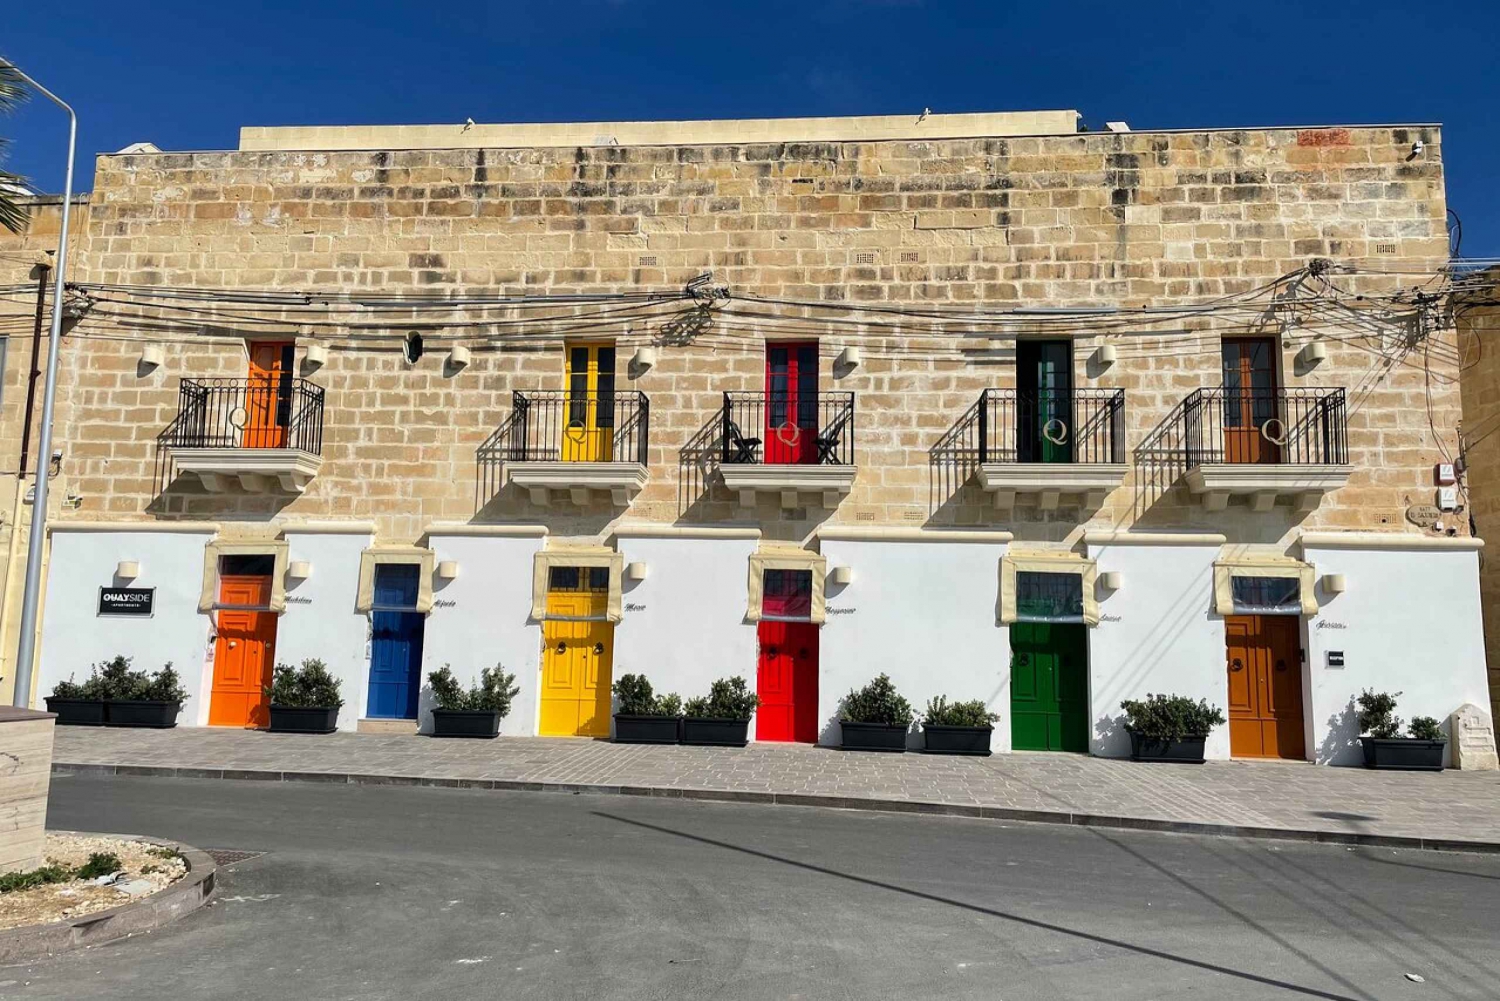 Adventures in Malta: Thrills, History, and Natural Beauty